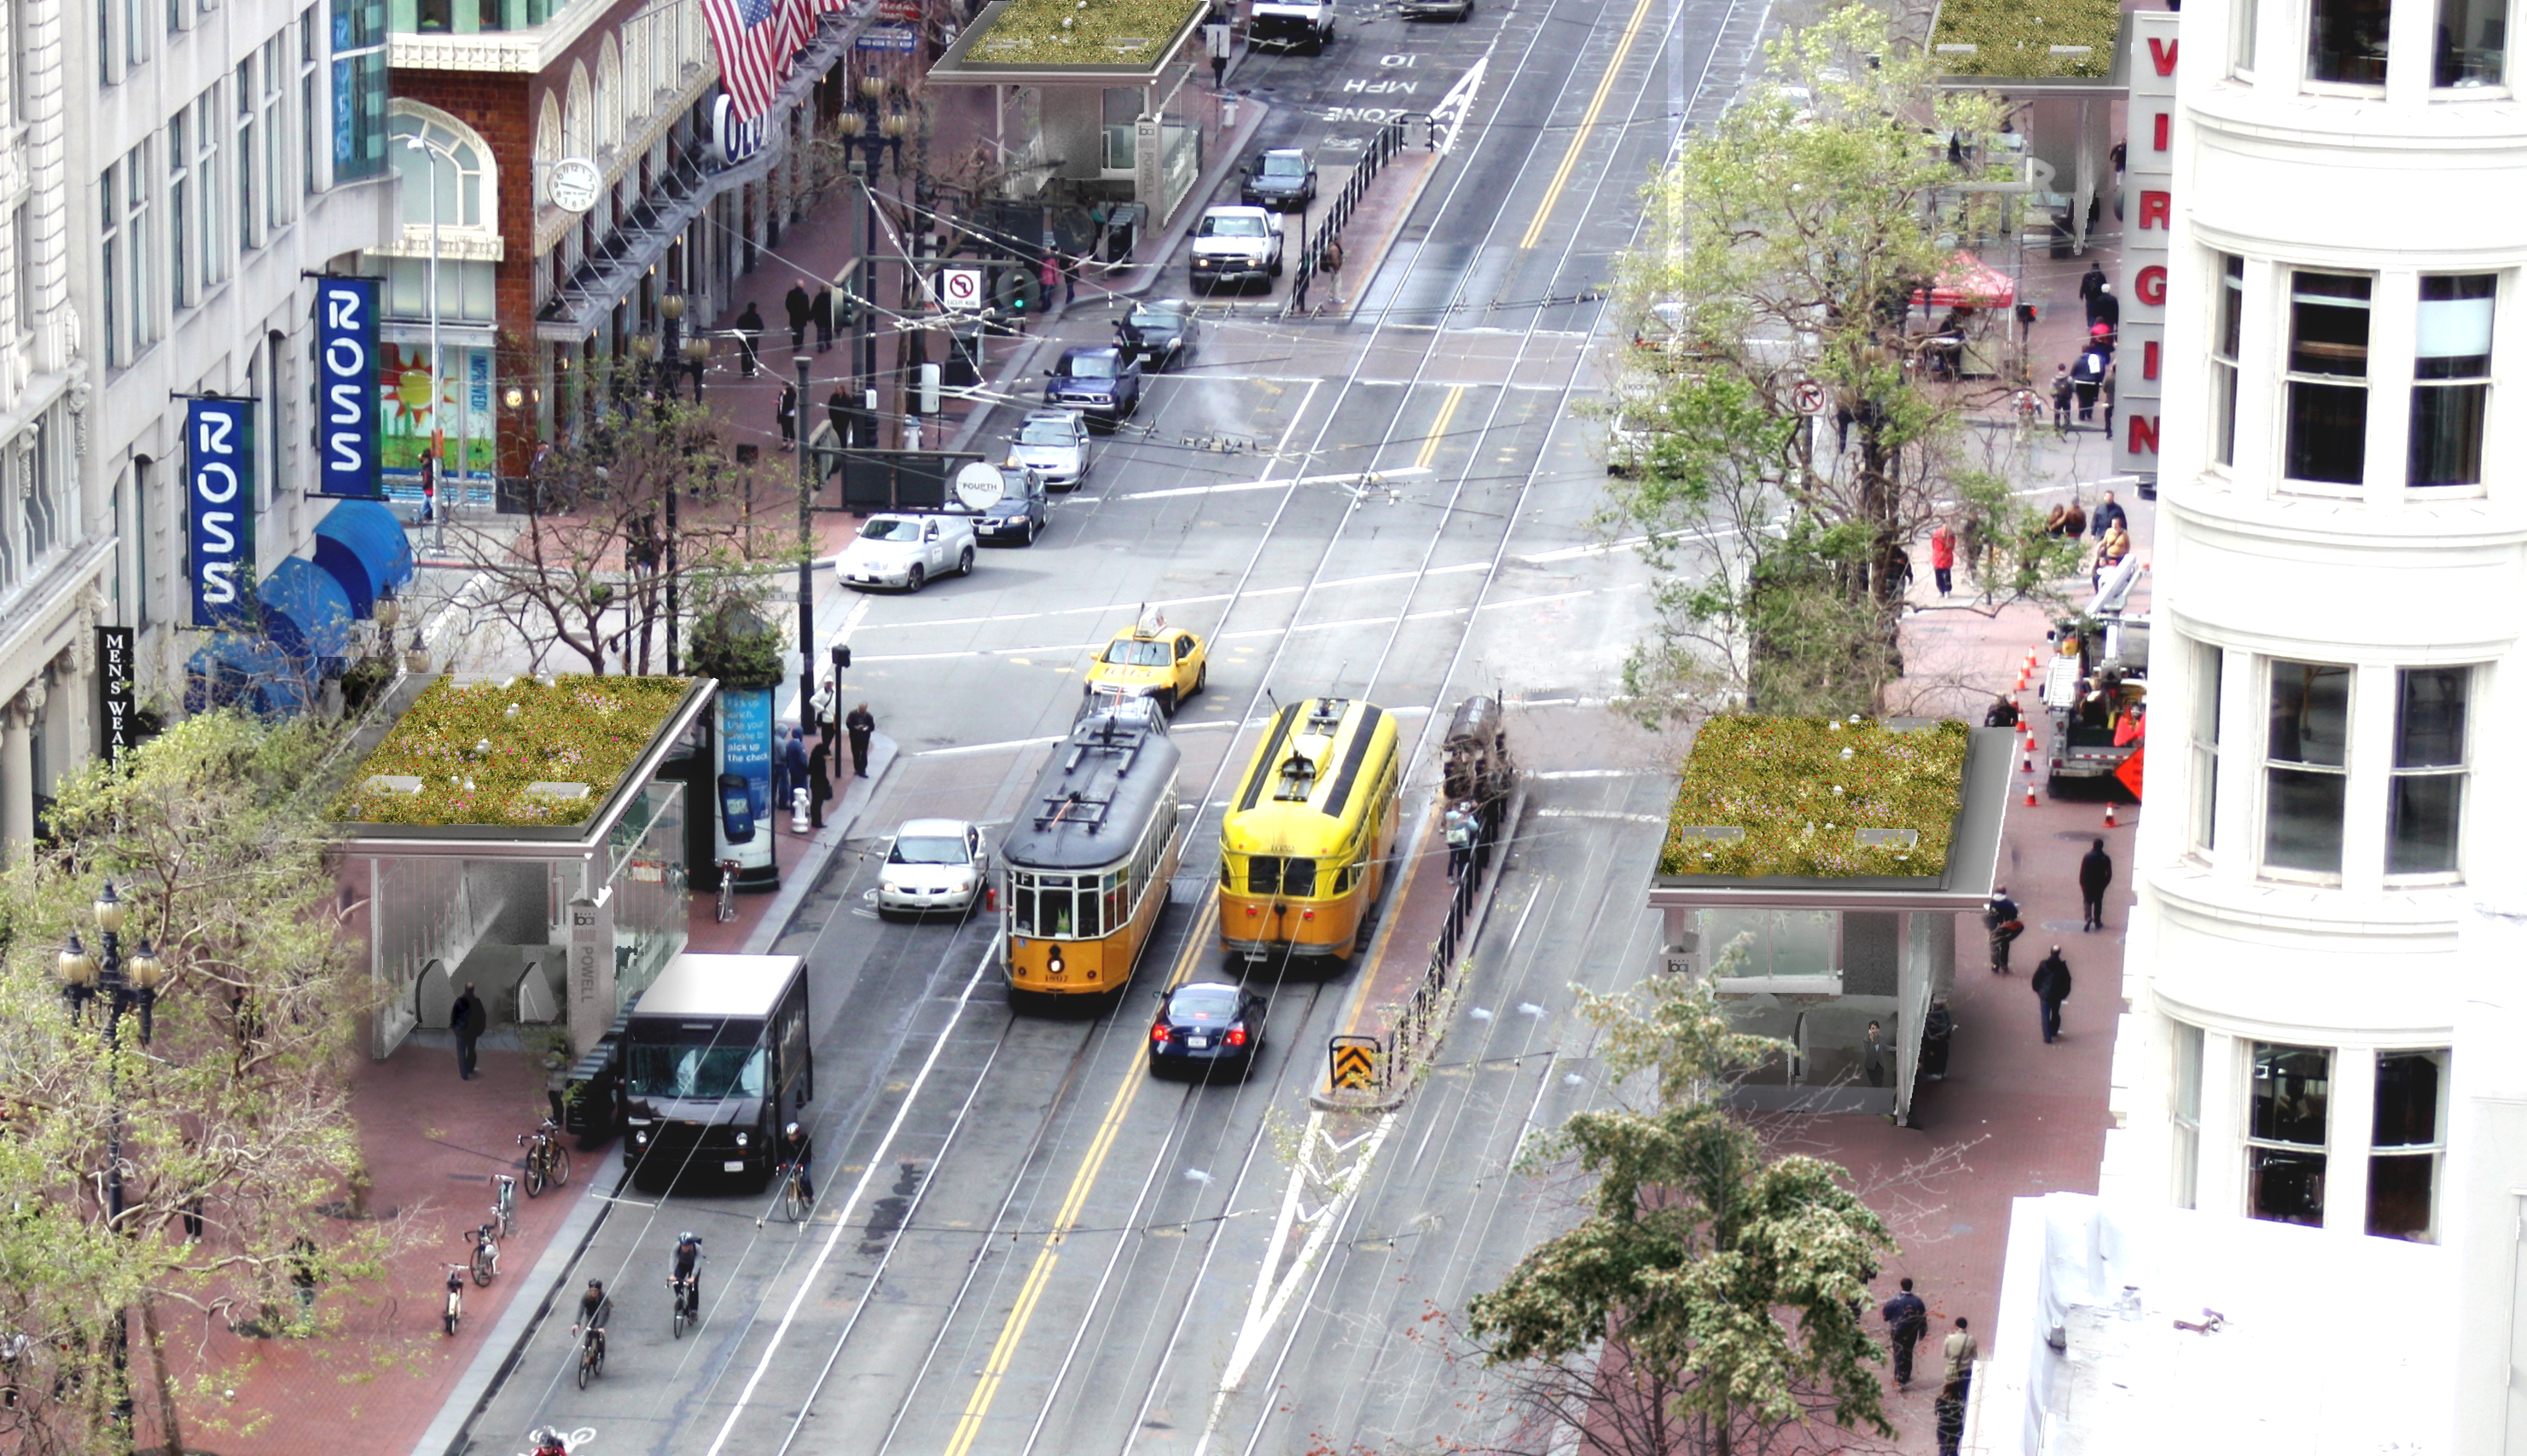 Market street showcases a green roof on two canopies